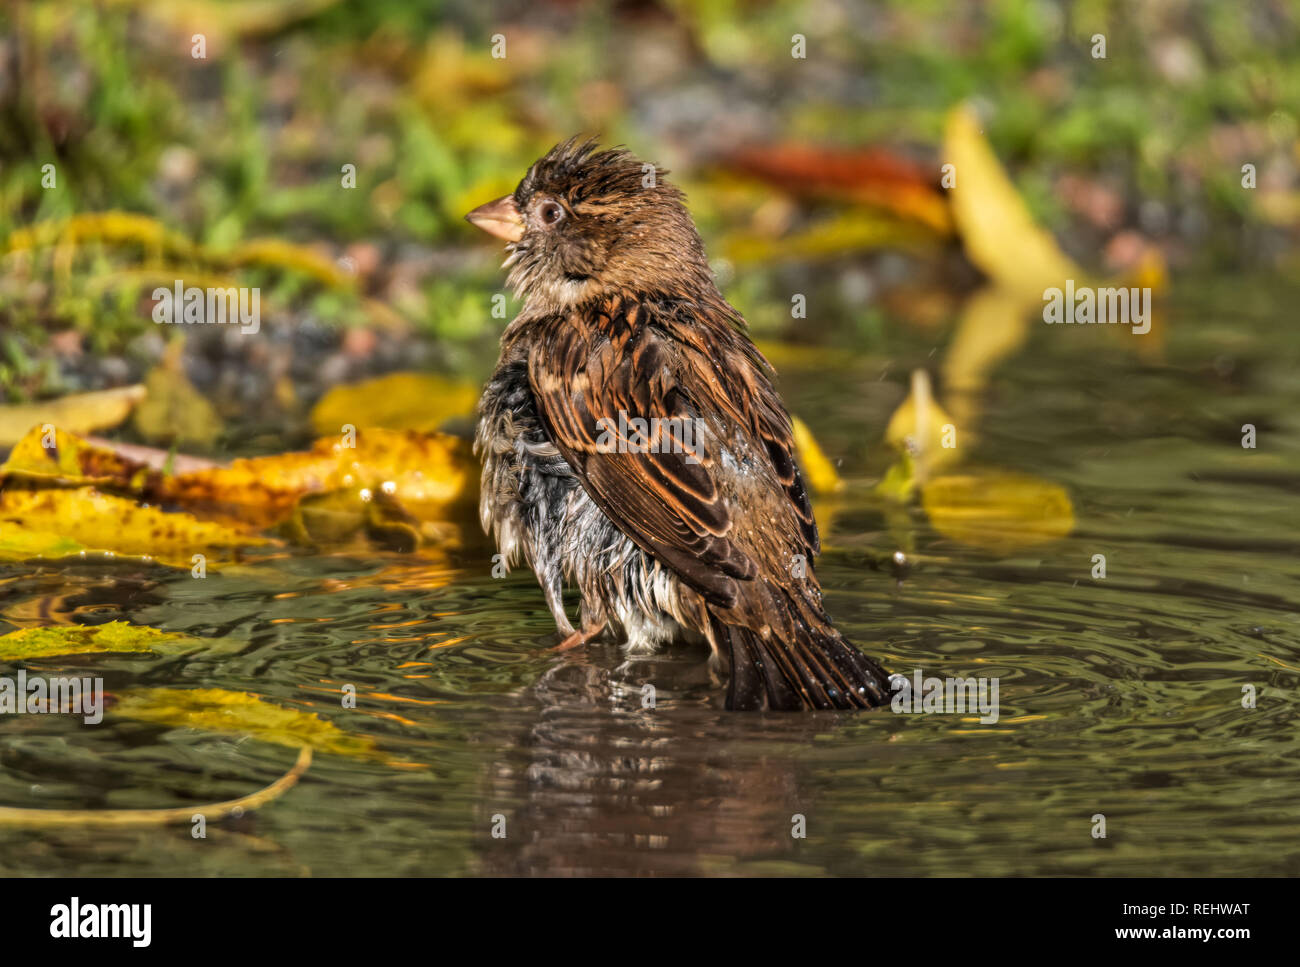 house sparrow taking a bath in a puddle of rainwater Stock Photo